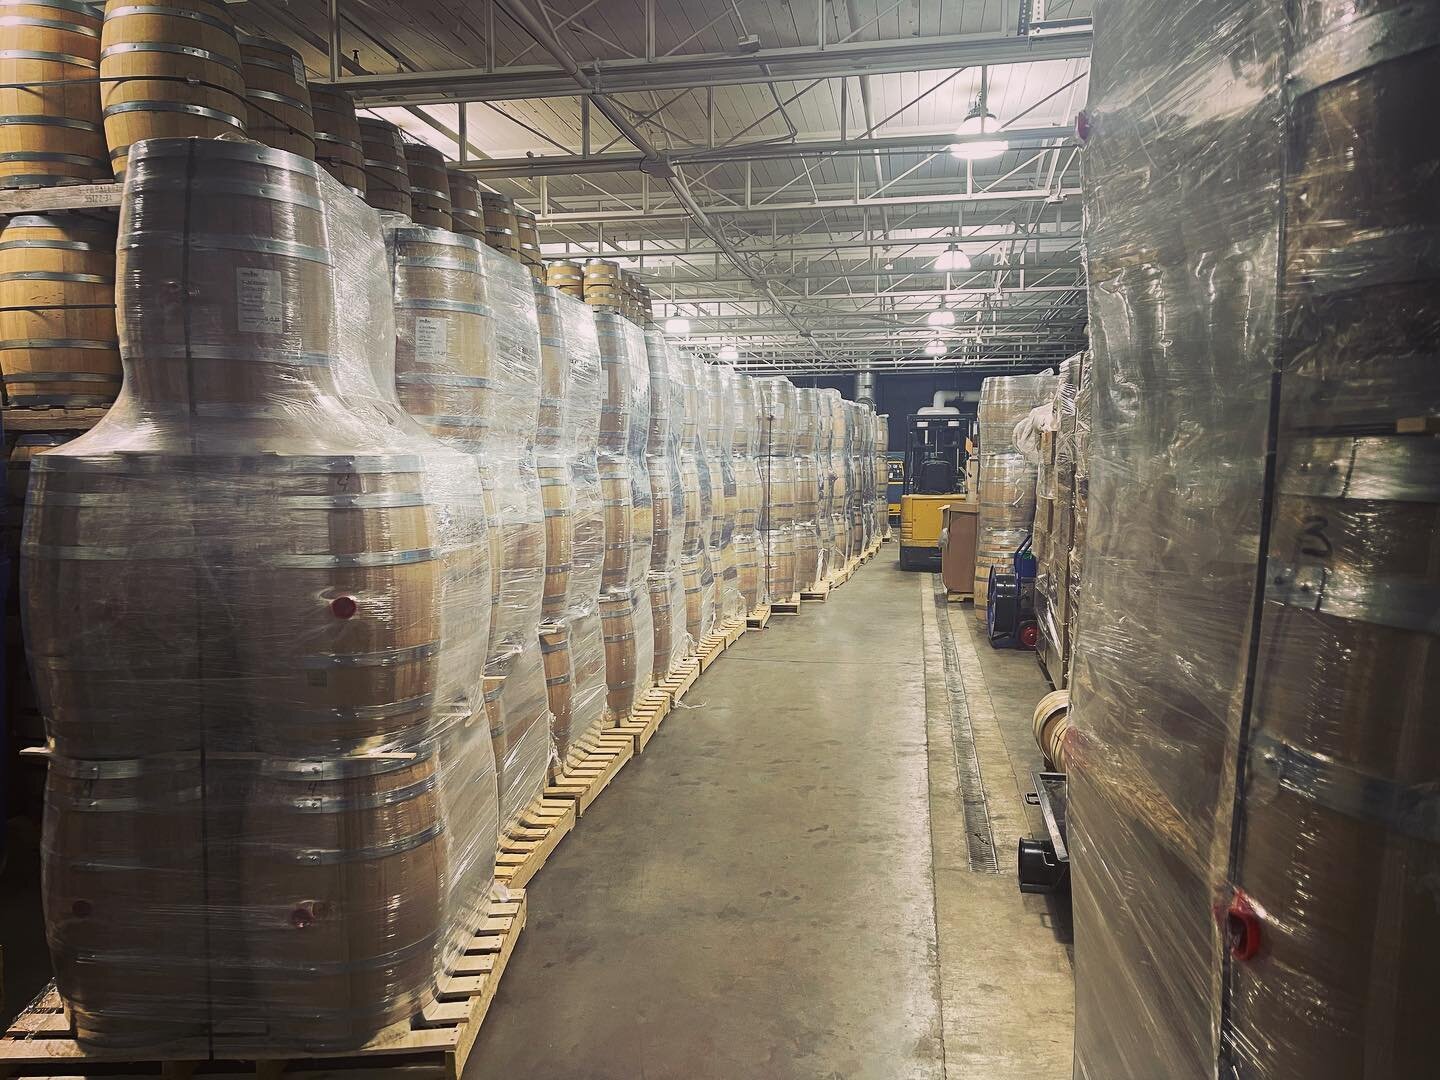 Nothing better than a steady supply of barrels from our friends at The Barrel Mill. We get to continue laying down the best whiskey possible.